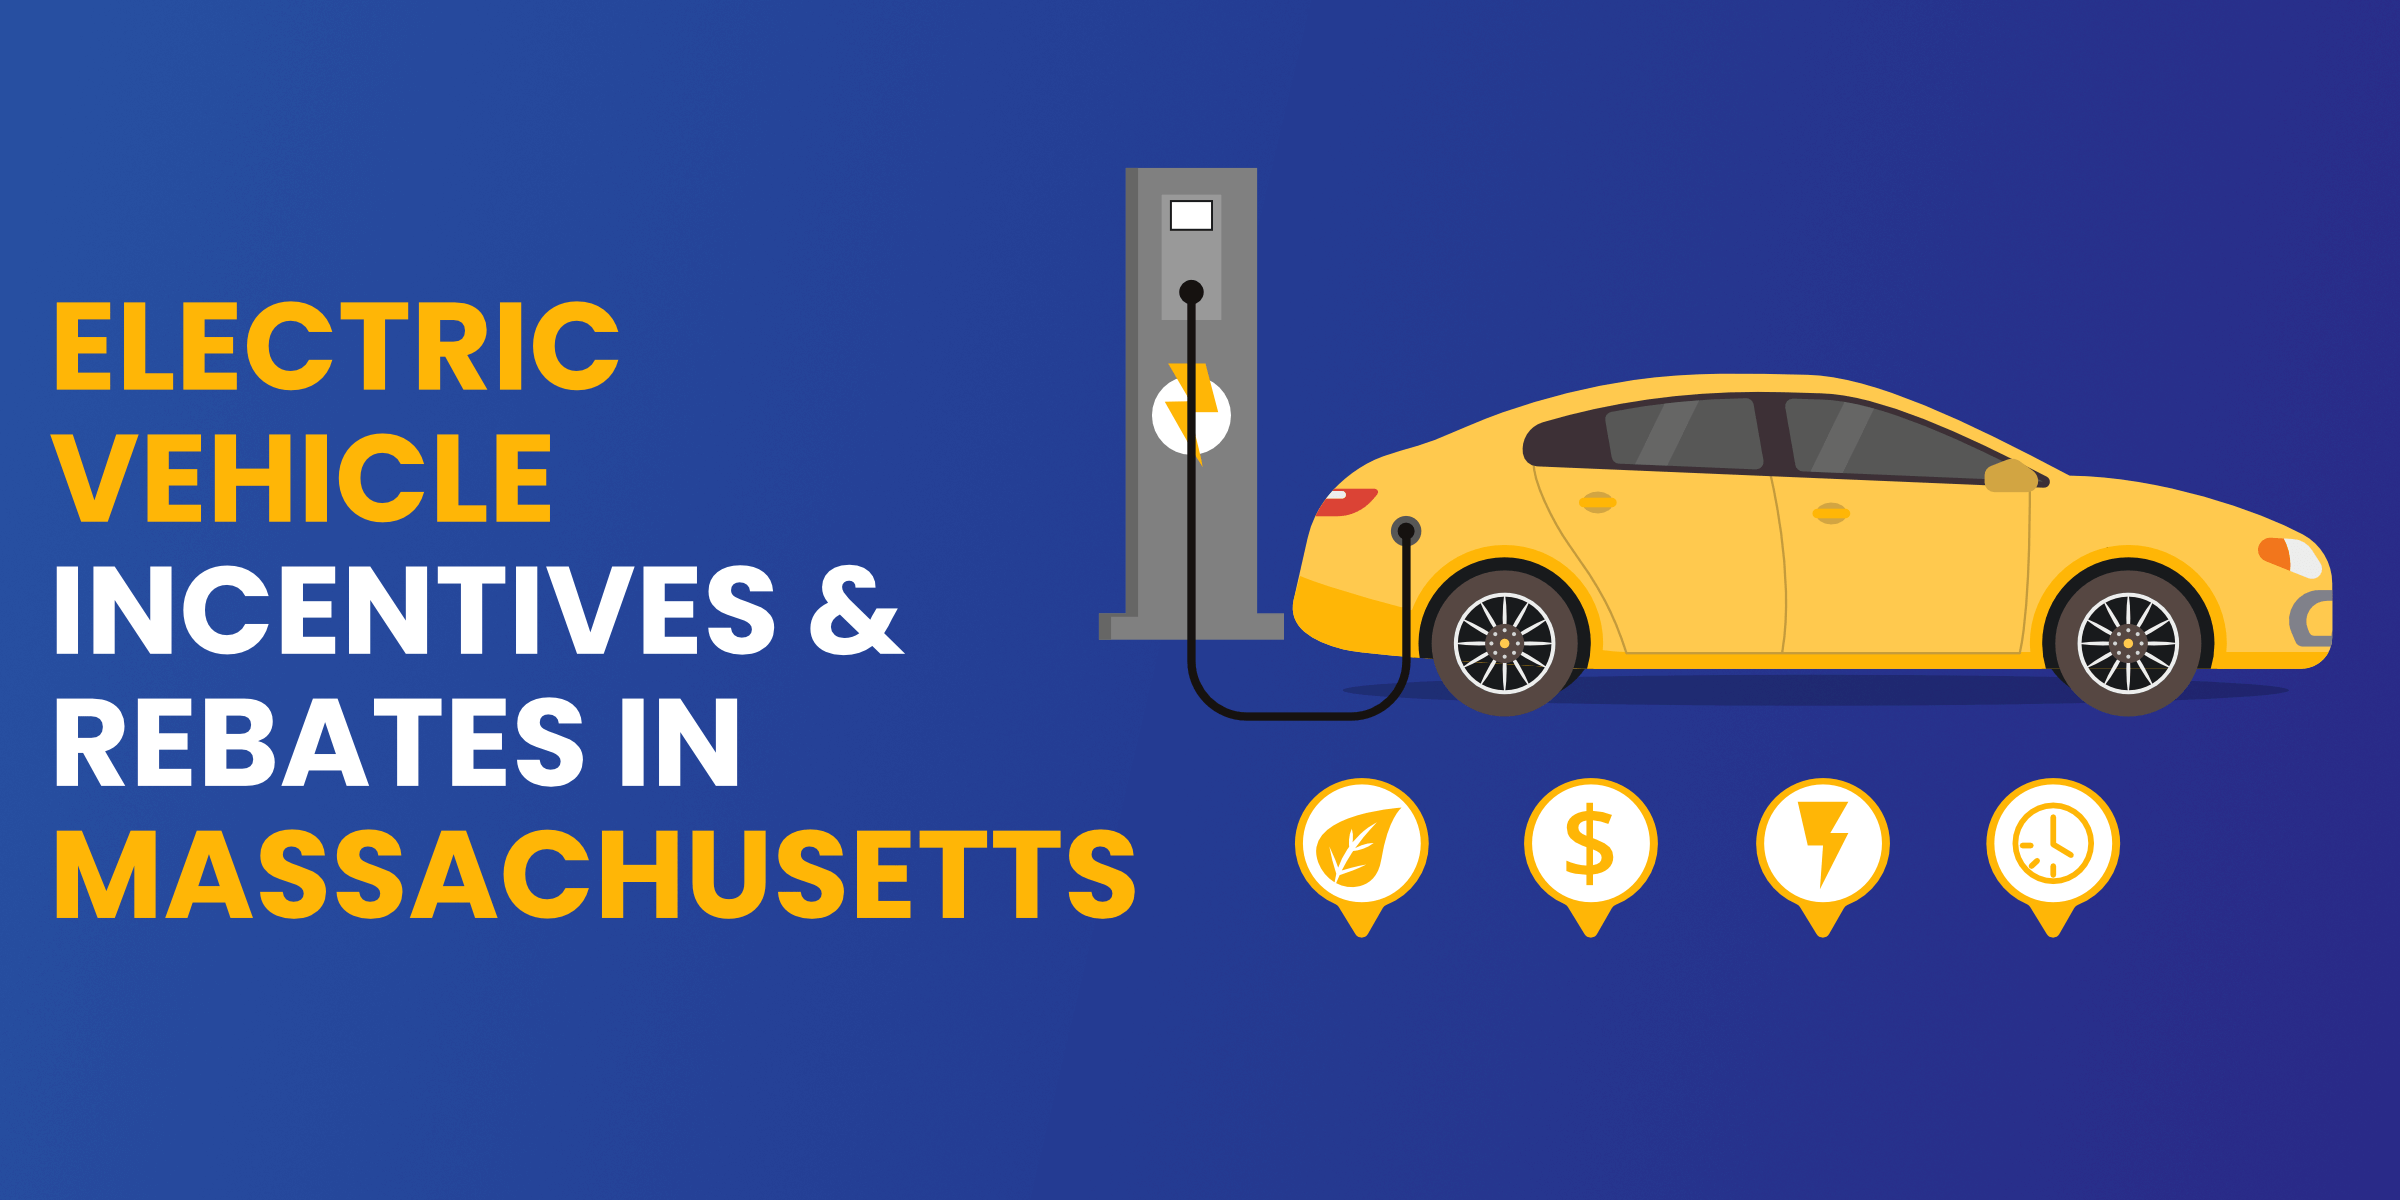 Electric vehicle incentives in Massachusetts